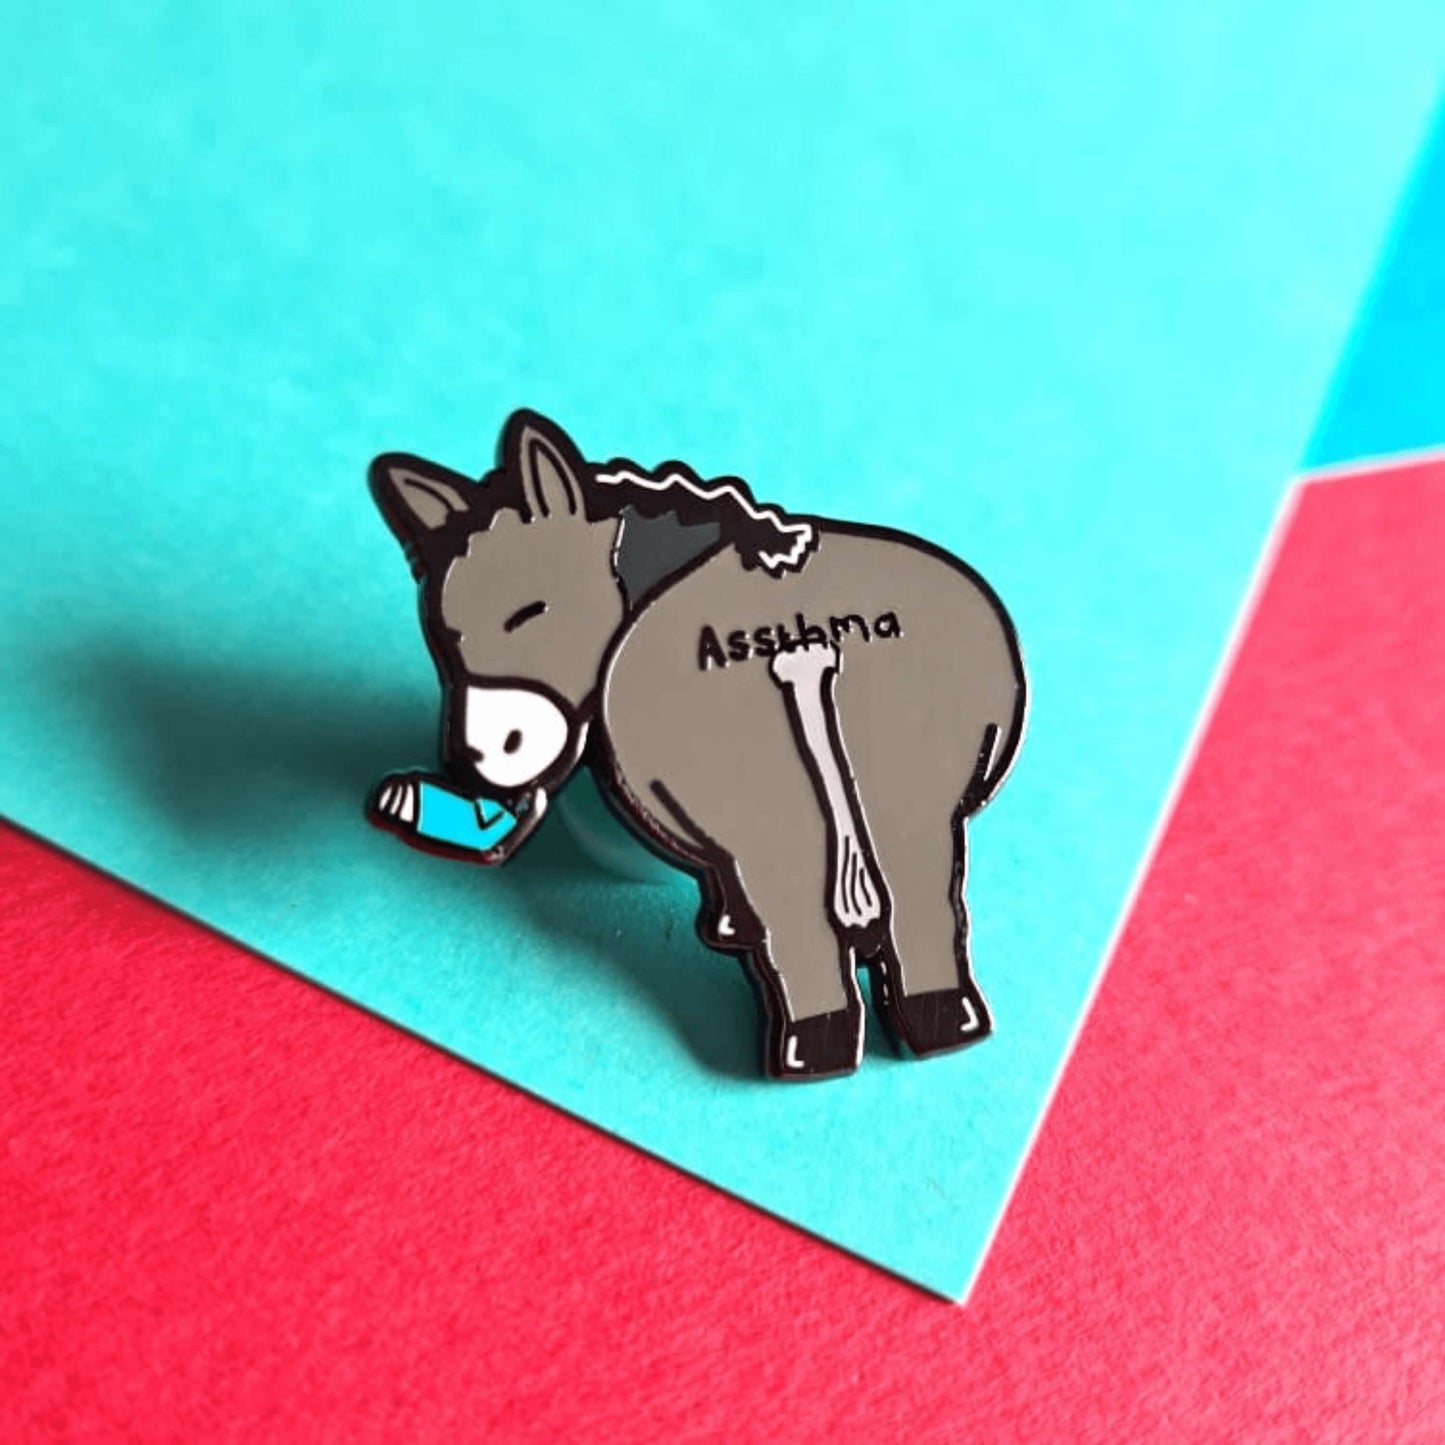 Assthma Enamel Pin - Asthma on a blue, green and red background. A grey donkey ass showing its behind with a blue asthma pump in its mouth and the word Assthma across its behind. The pin is designed to raise awareness for asthma.